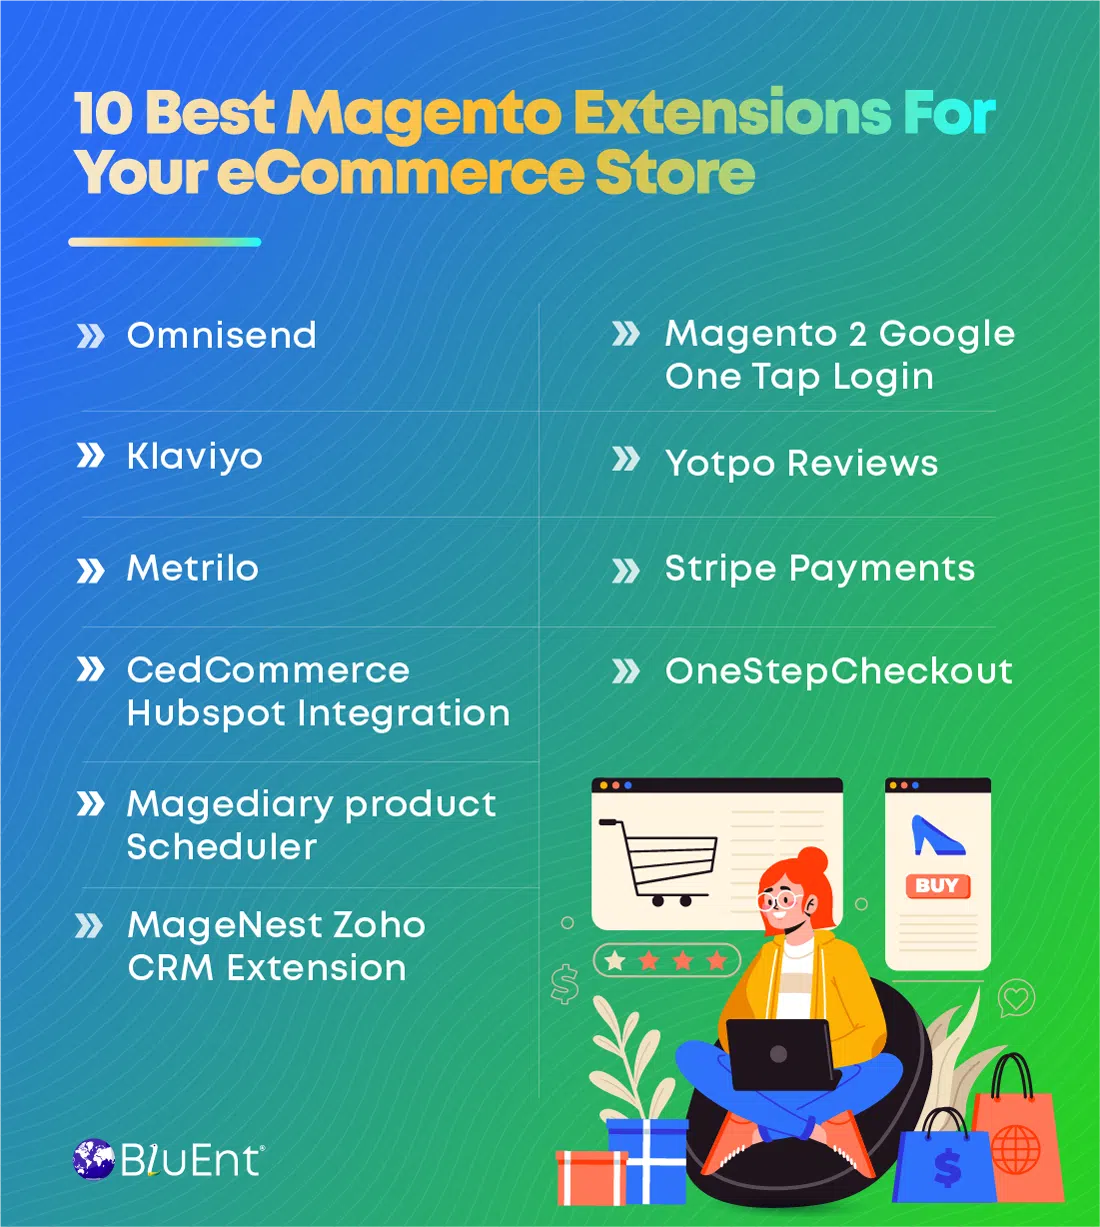 10 best Magento extensions with logos.